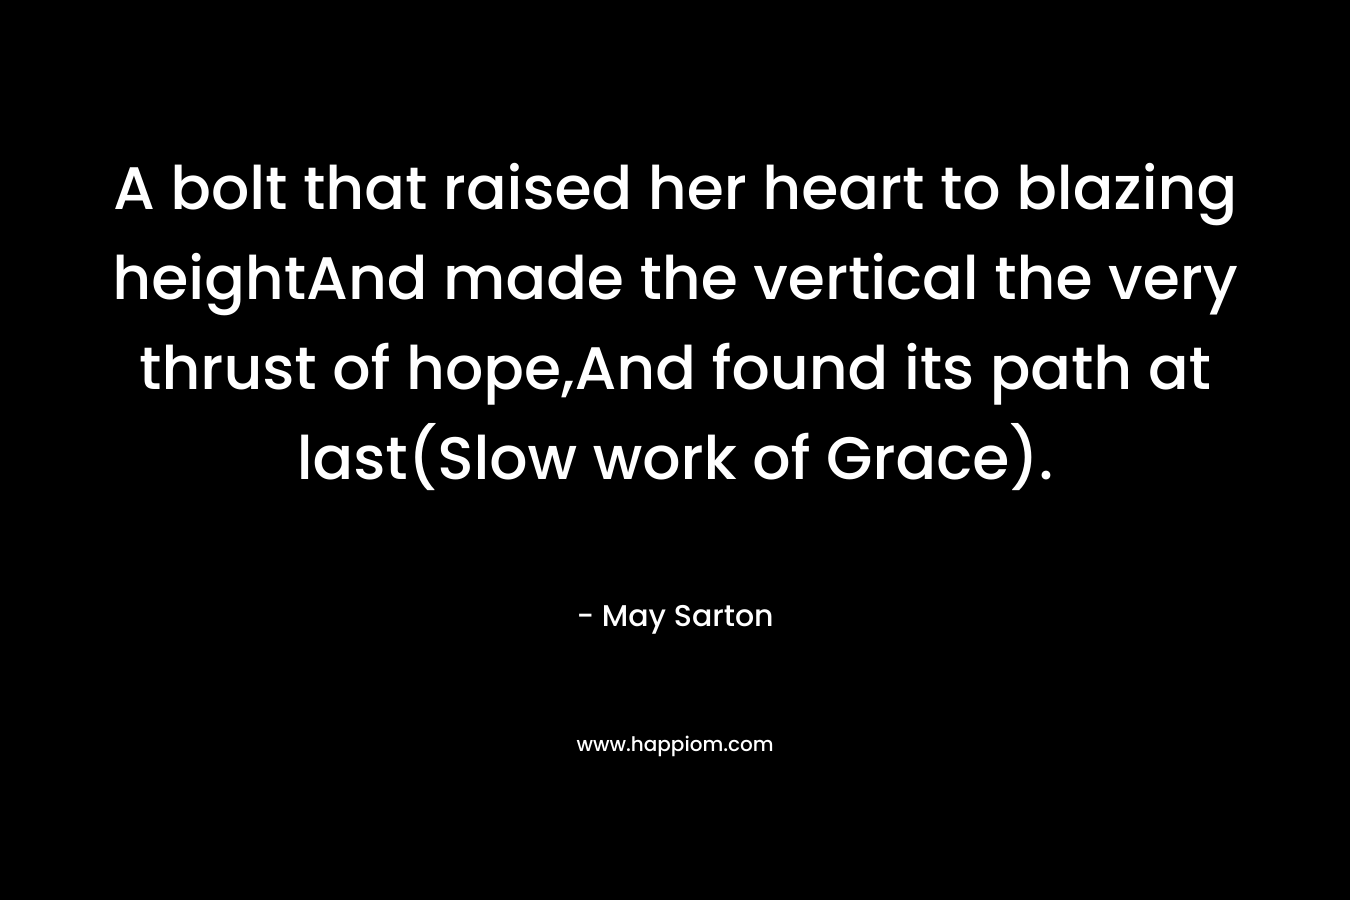 A bolt that raised her heart to blazing heightAnd made the vertical the very thrust of hope,And found its path at last(Slow work of Grace). – May Sarton